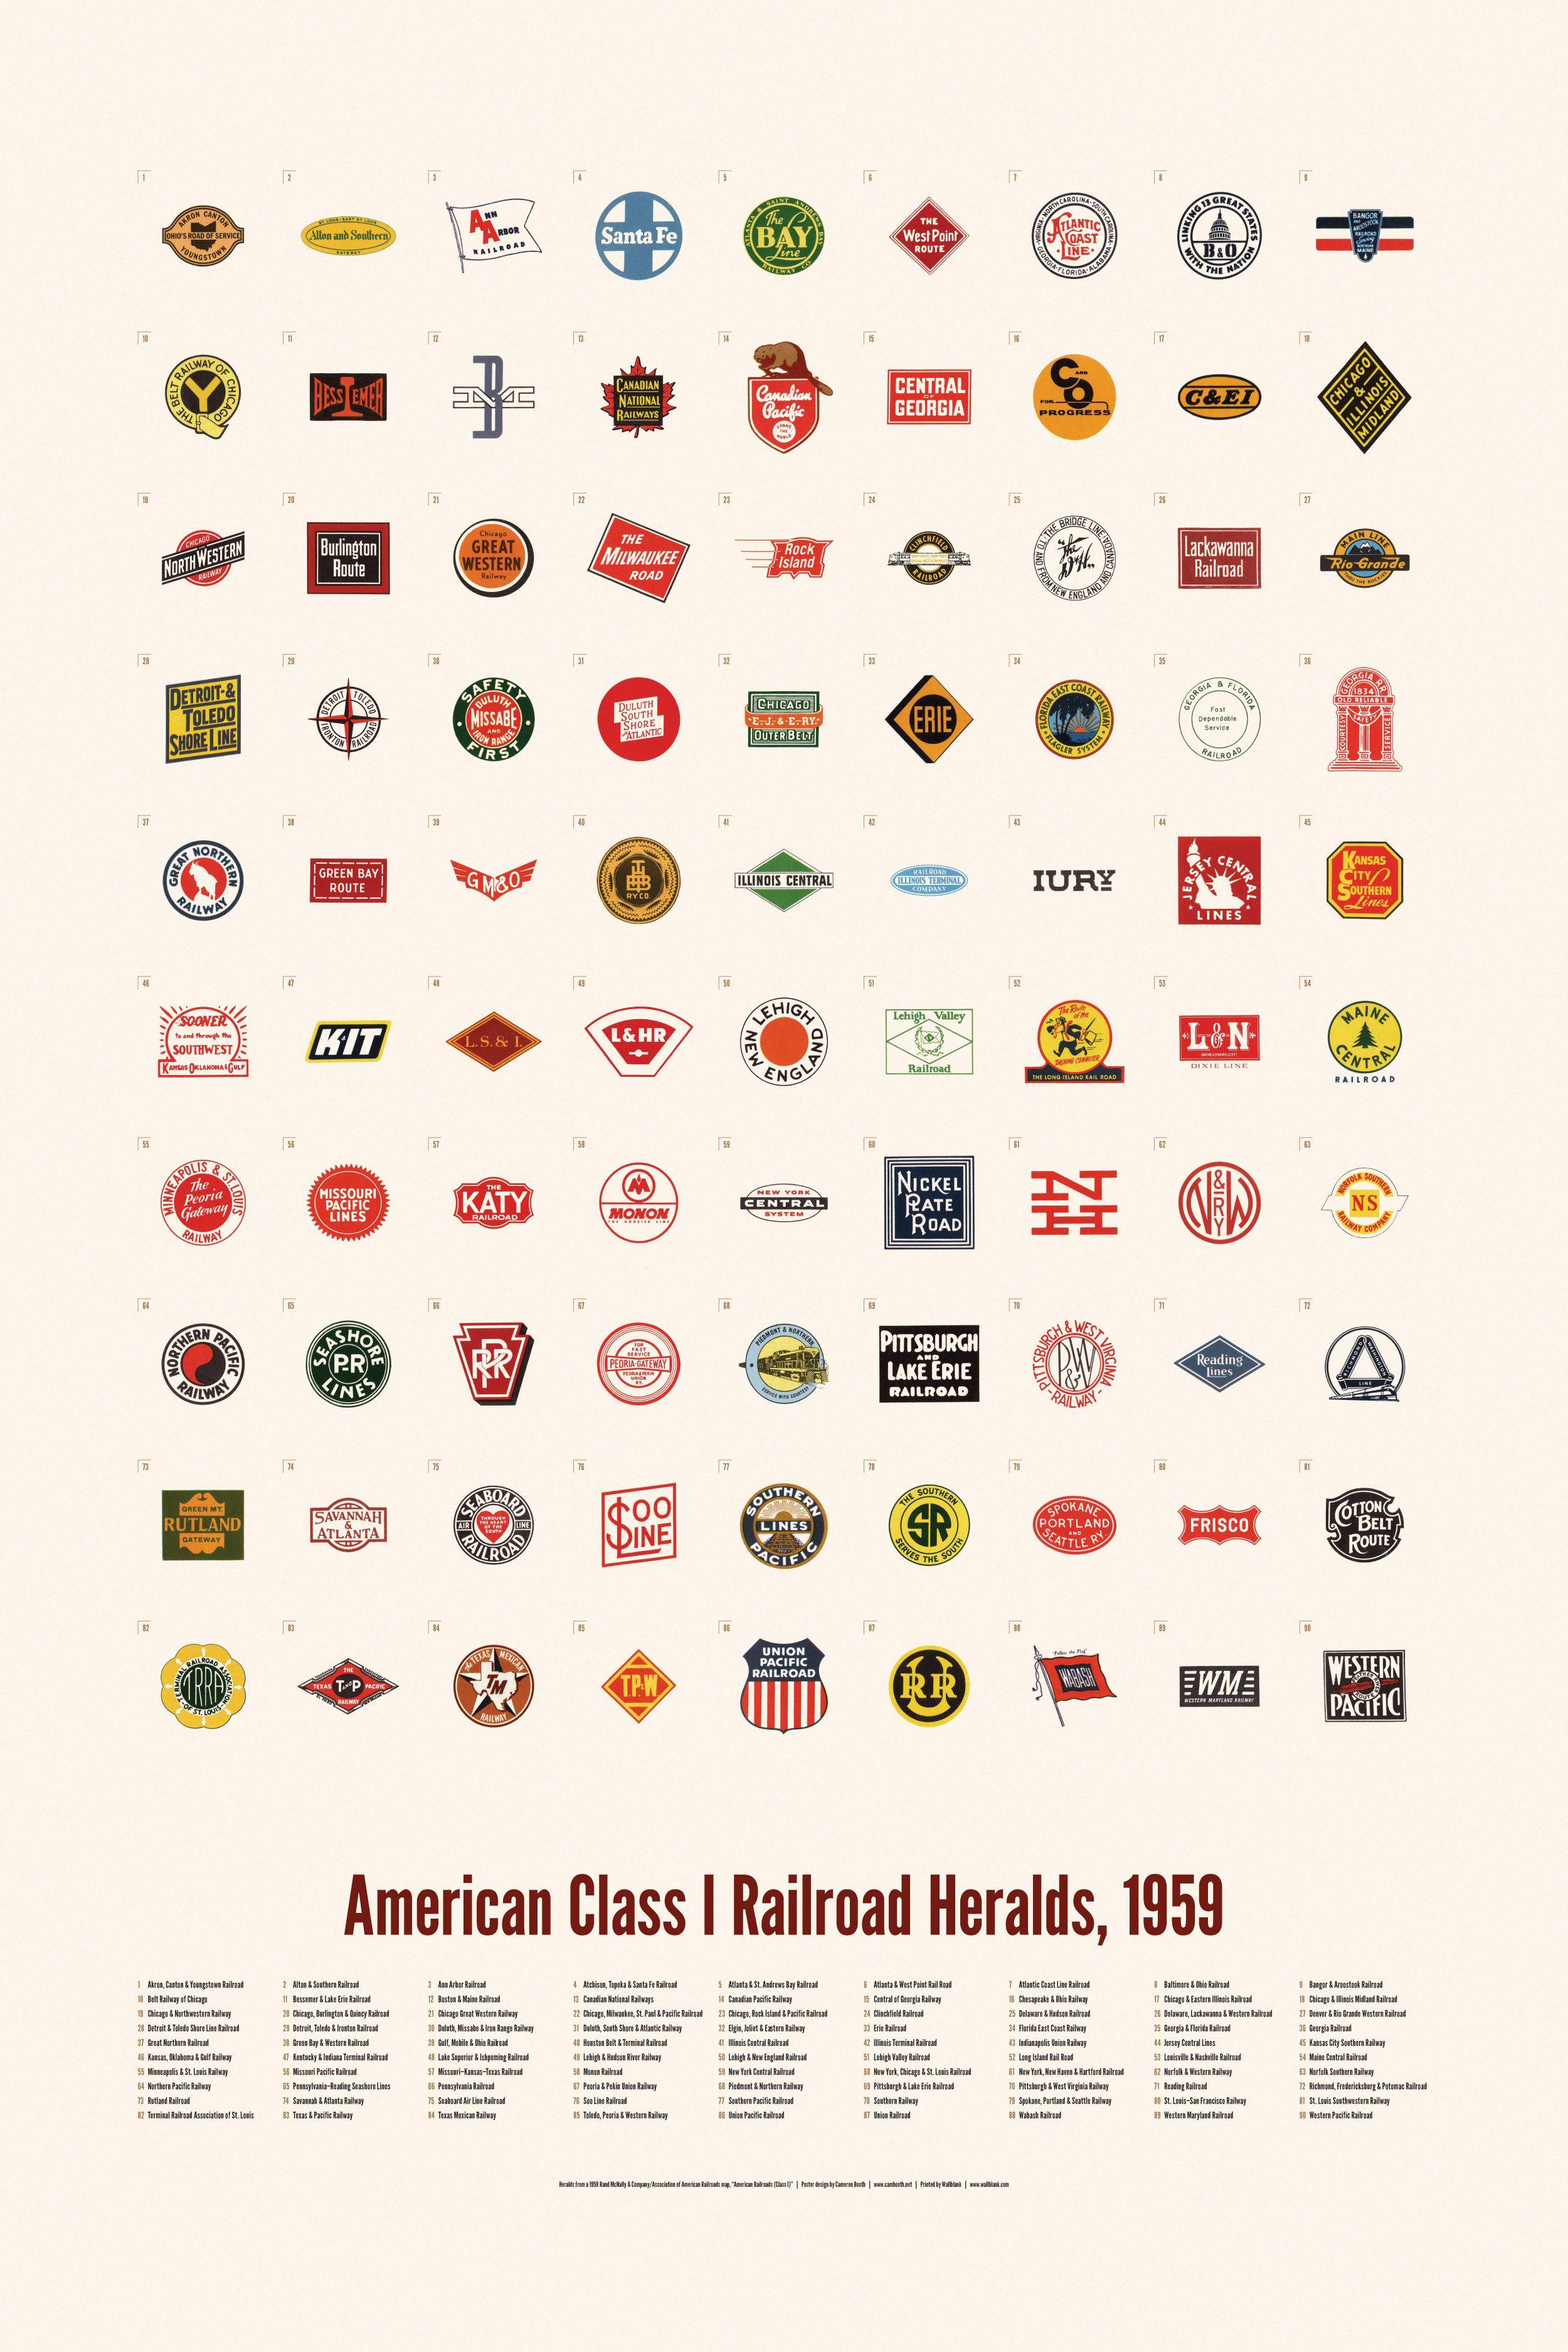 Old Railroad Logo - Project: American Class I Railroad Heralds, 1959 – Cameron Booth